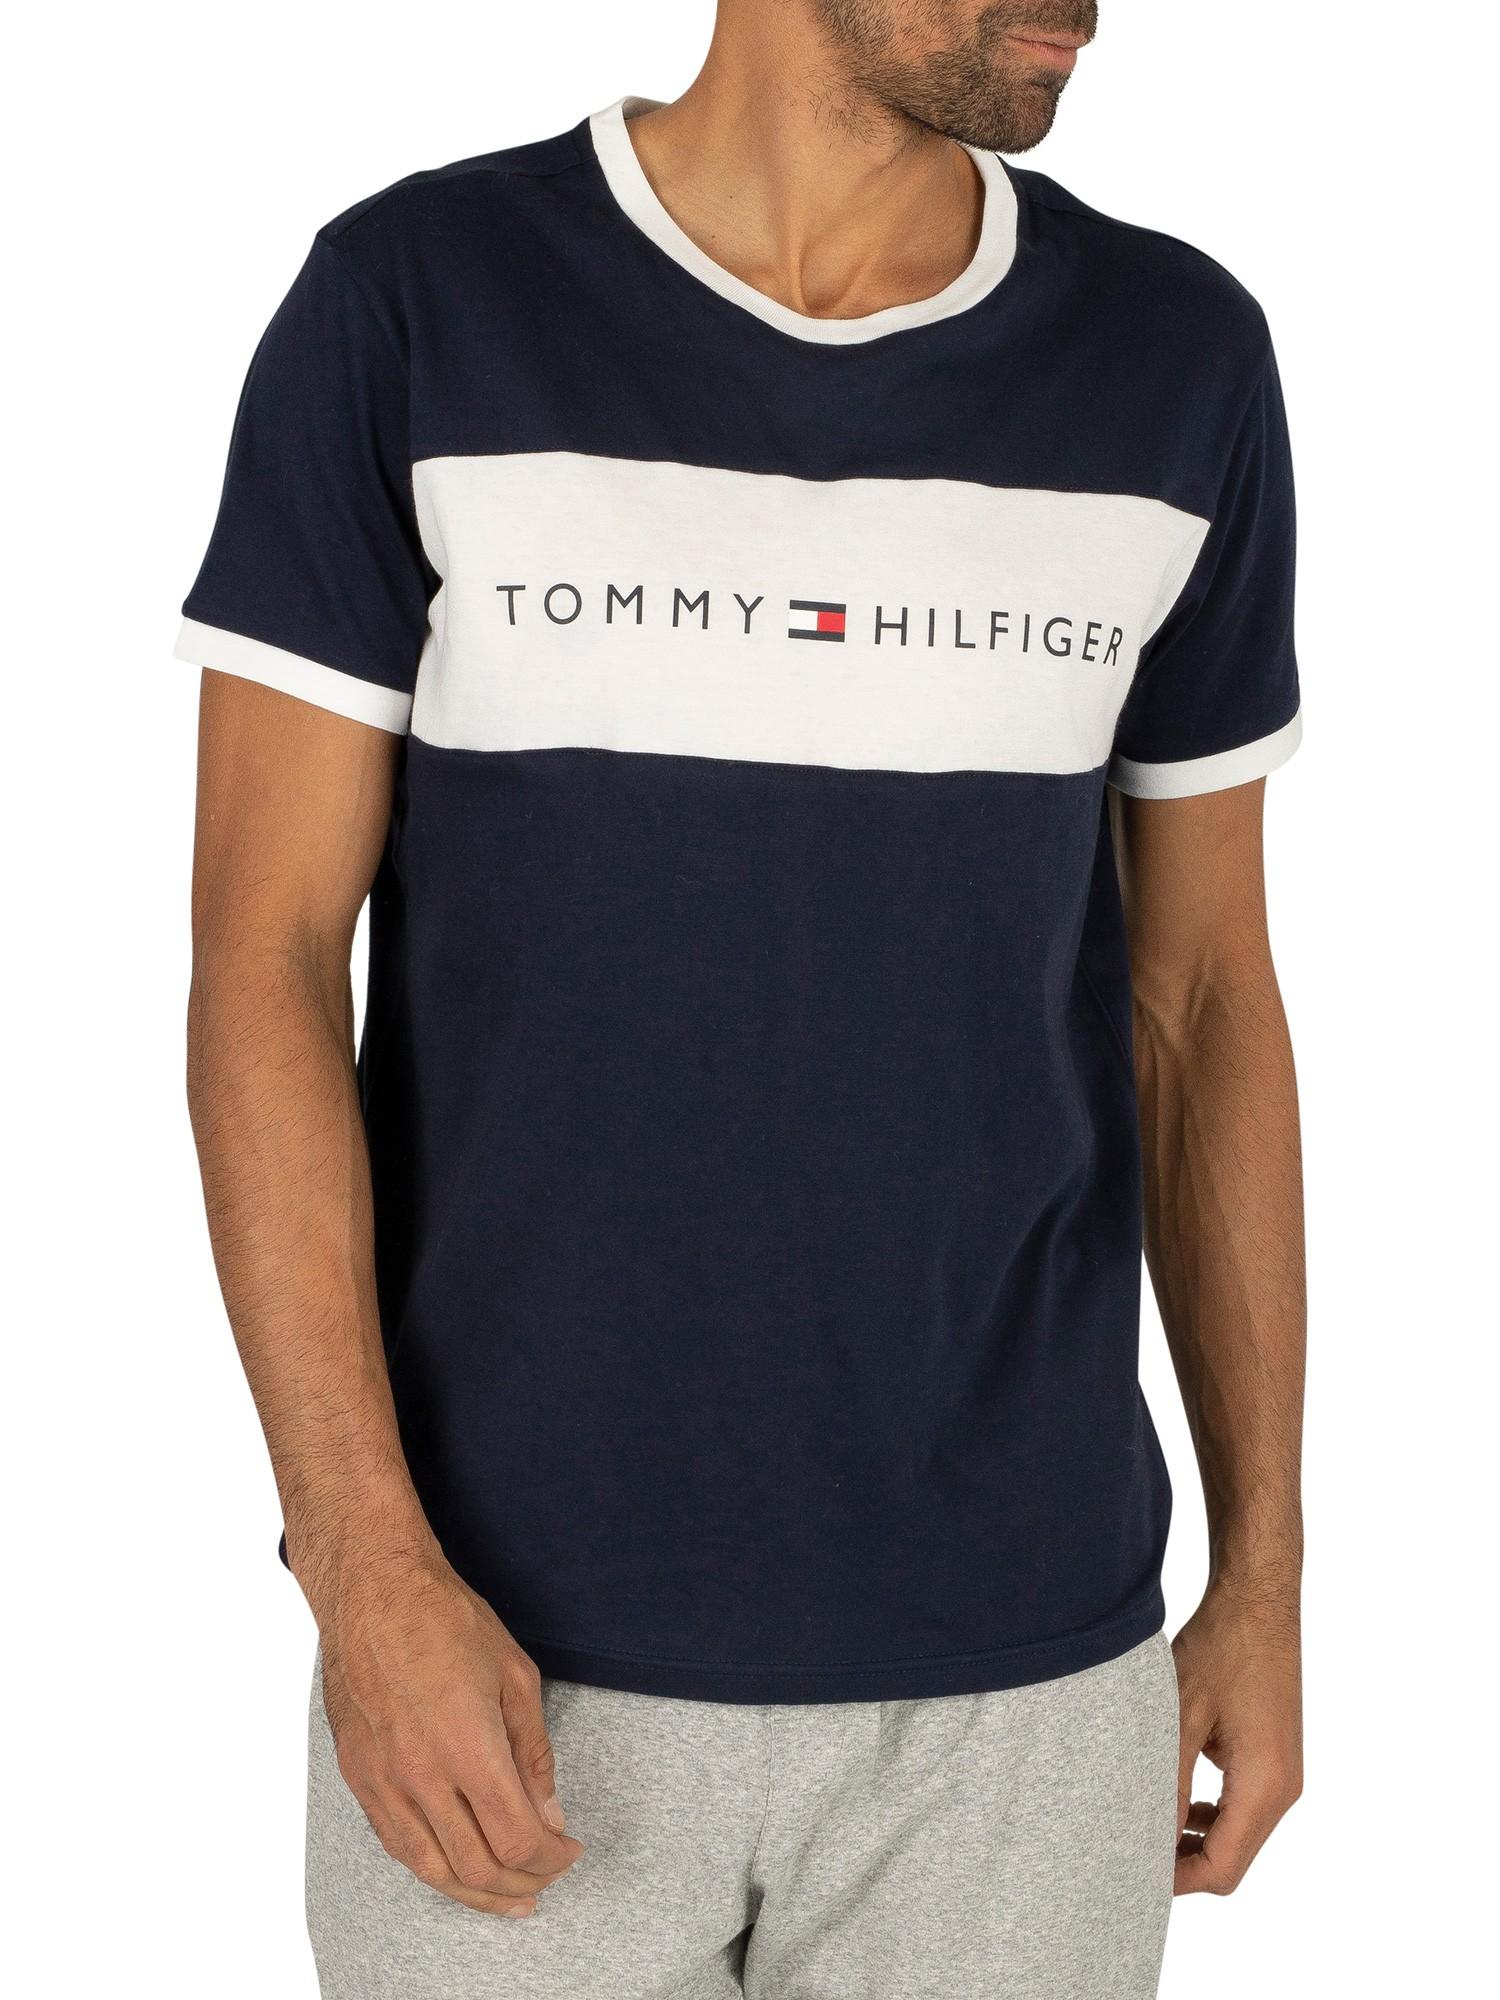 Tommy Hilfiger Cotton Tommy Jeans Navy Logo T-shirt in Blue for Men - Lyst